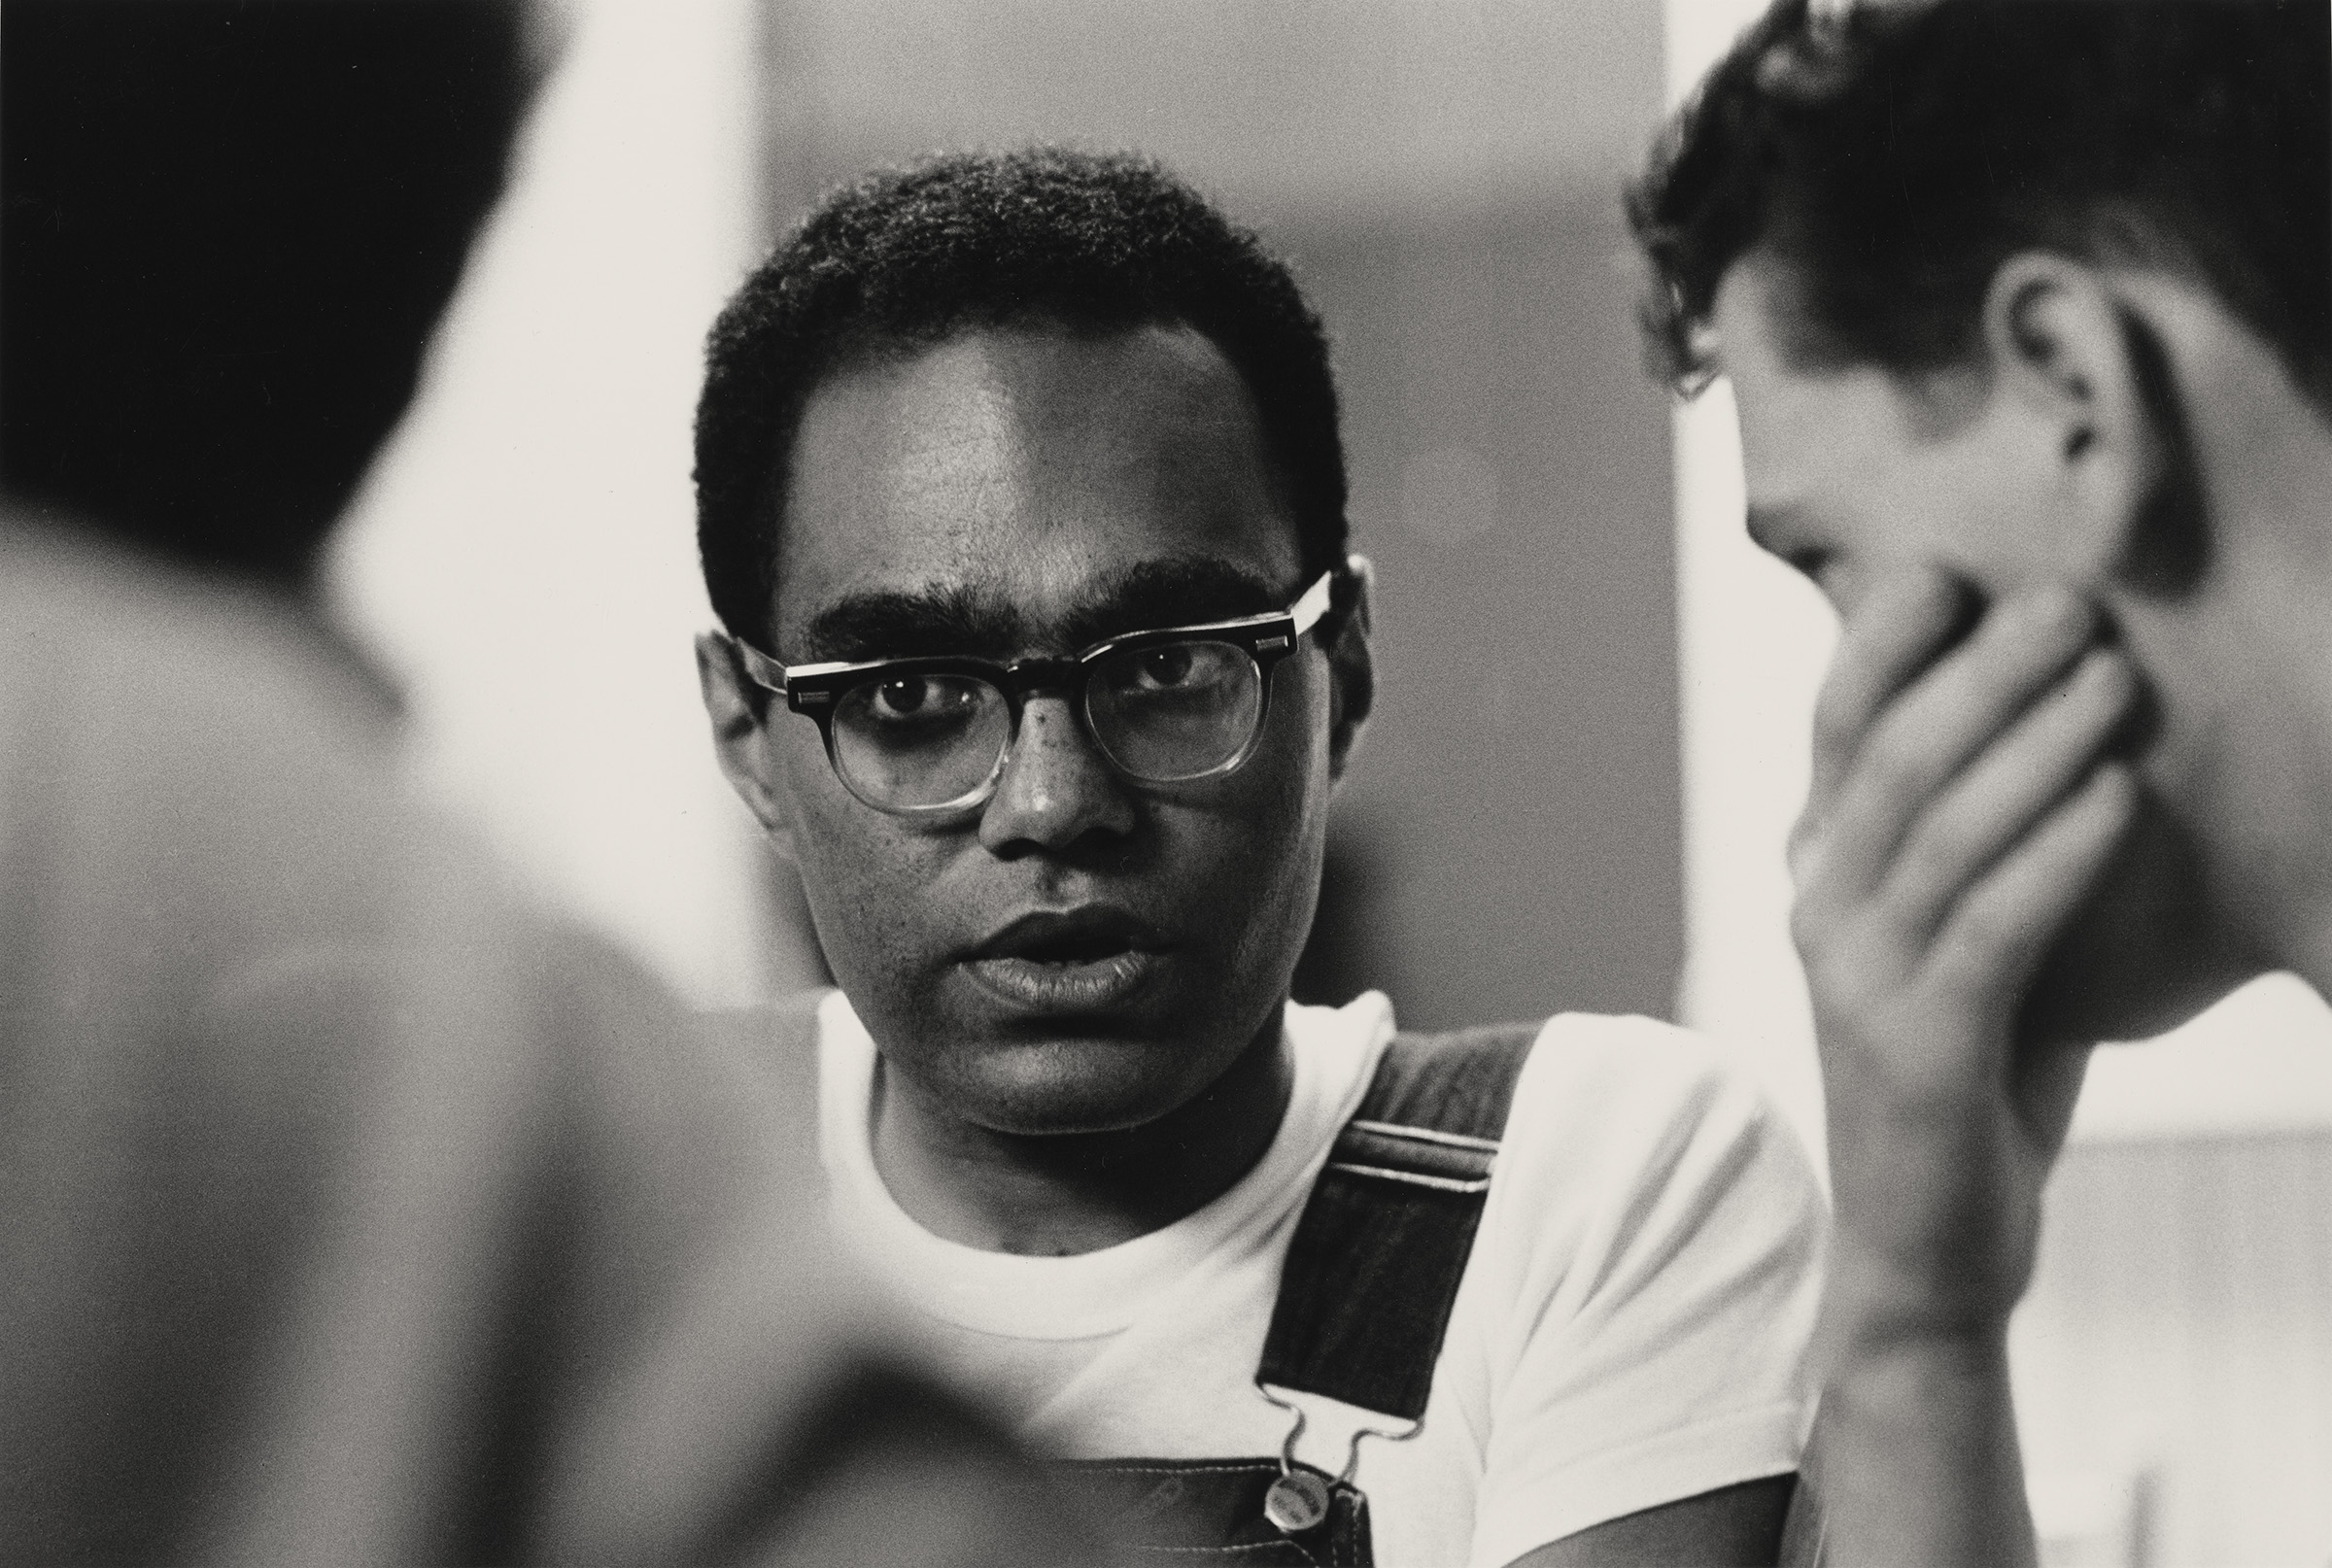 Bob Moses, June 1964. Photograph by Steve Schapiro. Picture of Bob Moses taken during the Freedom Summer orientation session in Oxford, Ohio. Photograph in the collection of Miami University Art Museum, Oxford Ohio. Partial gift of the artist and partial purchase with contributions from the Kezur Endowment Fund (2019.23.2).